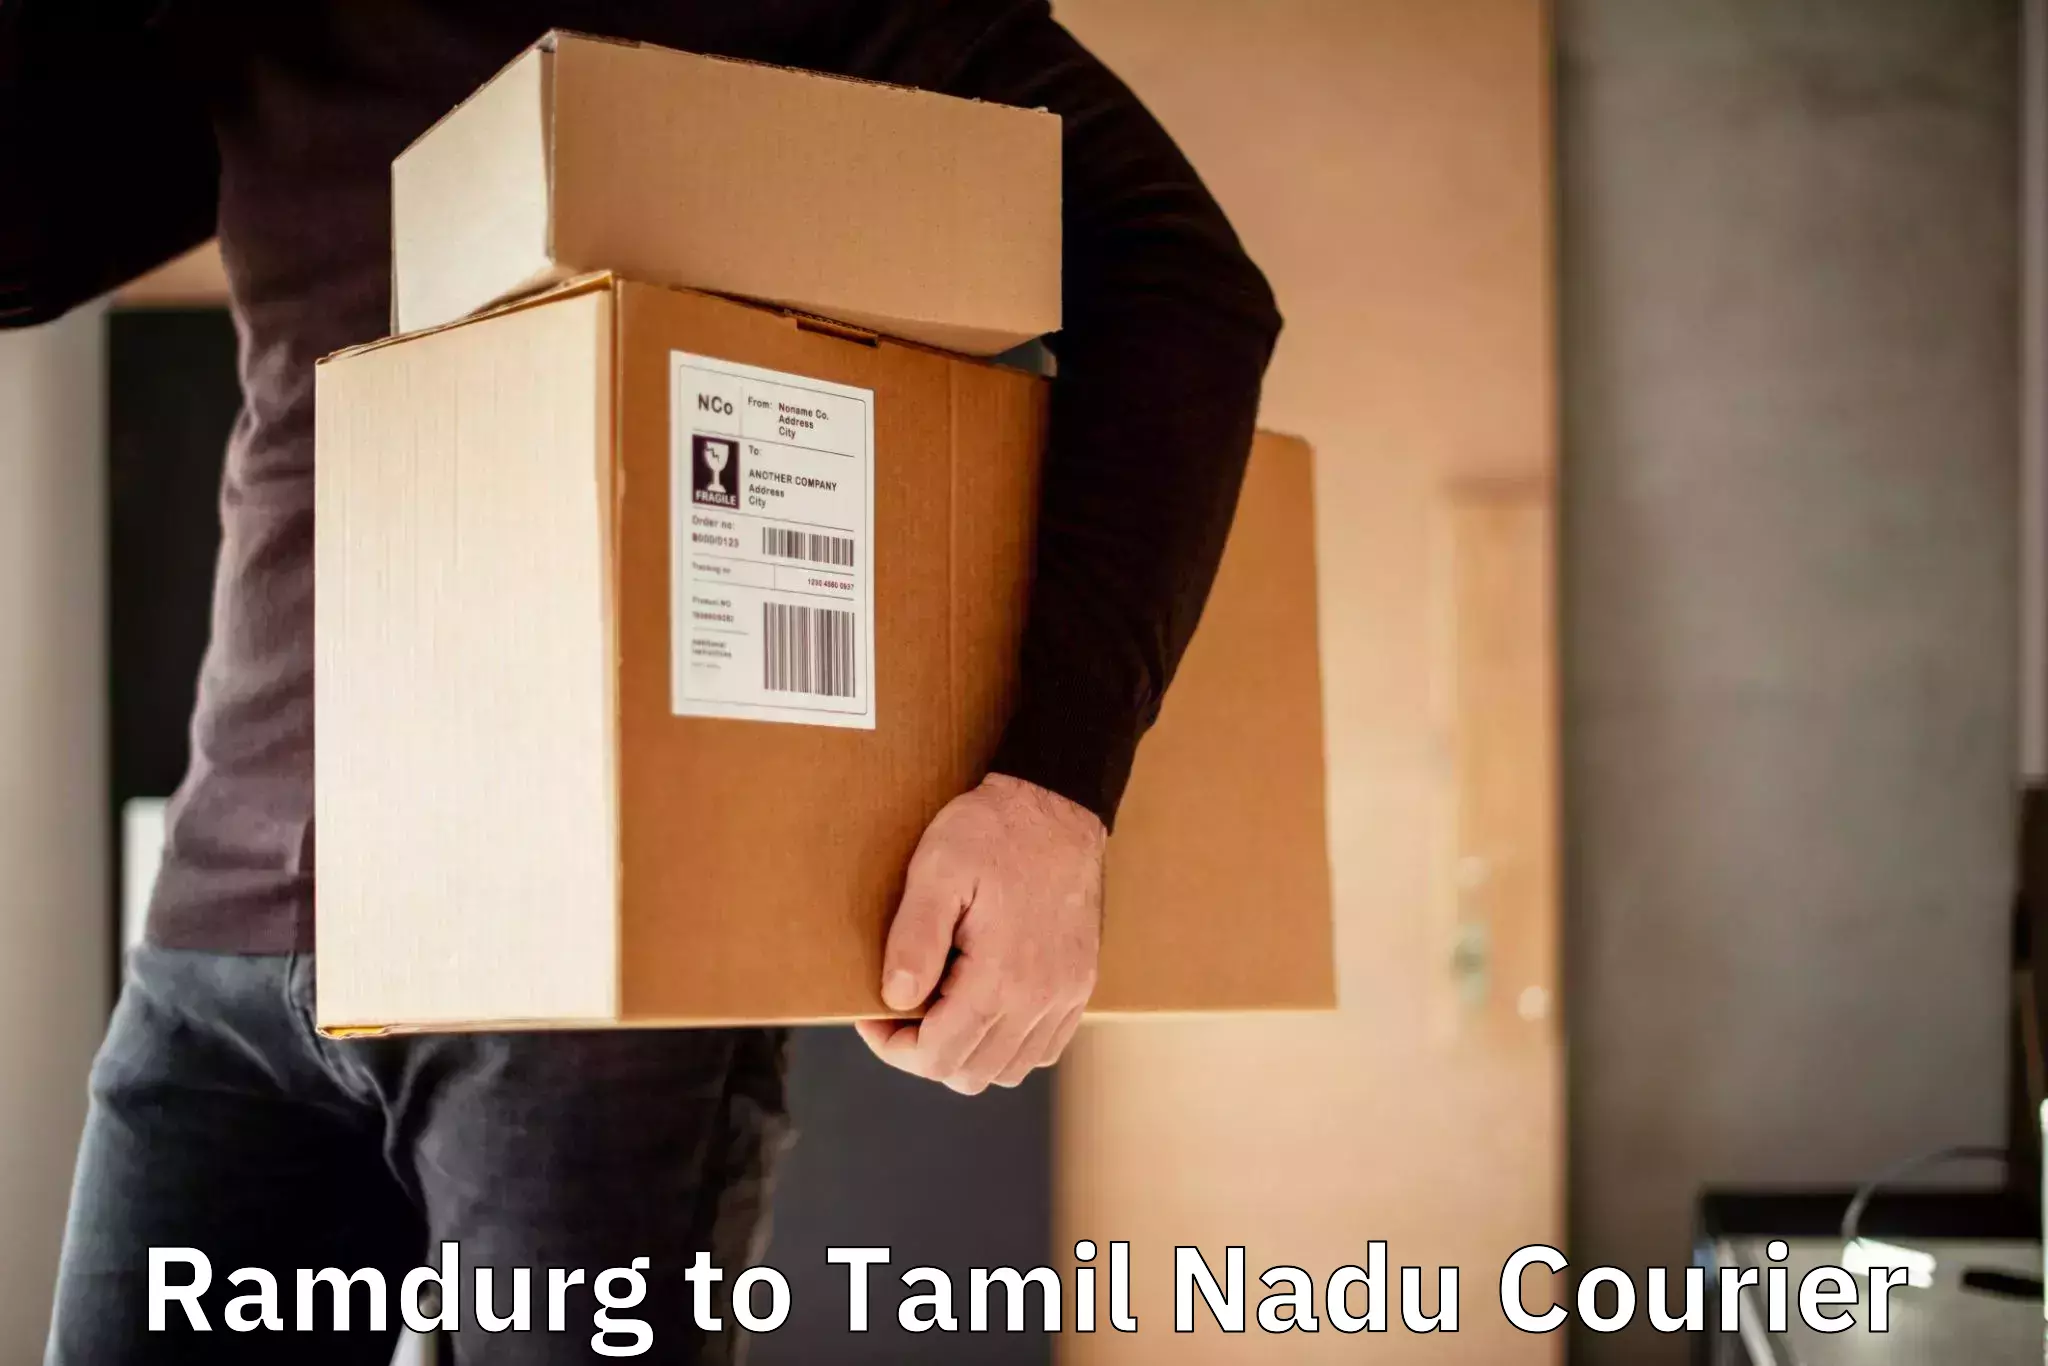 Bulk courier orders Ramdurg to Nagercoil